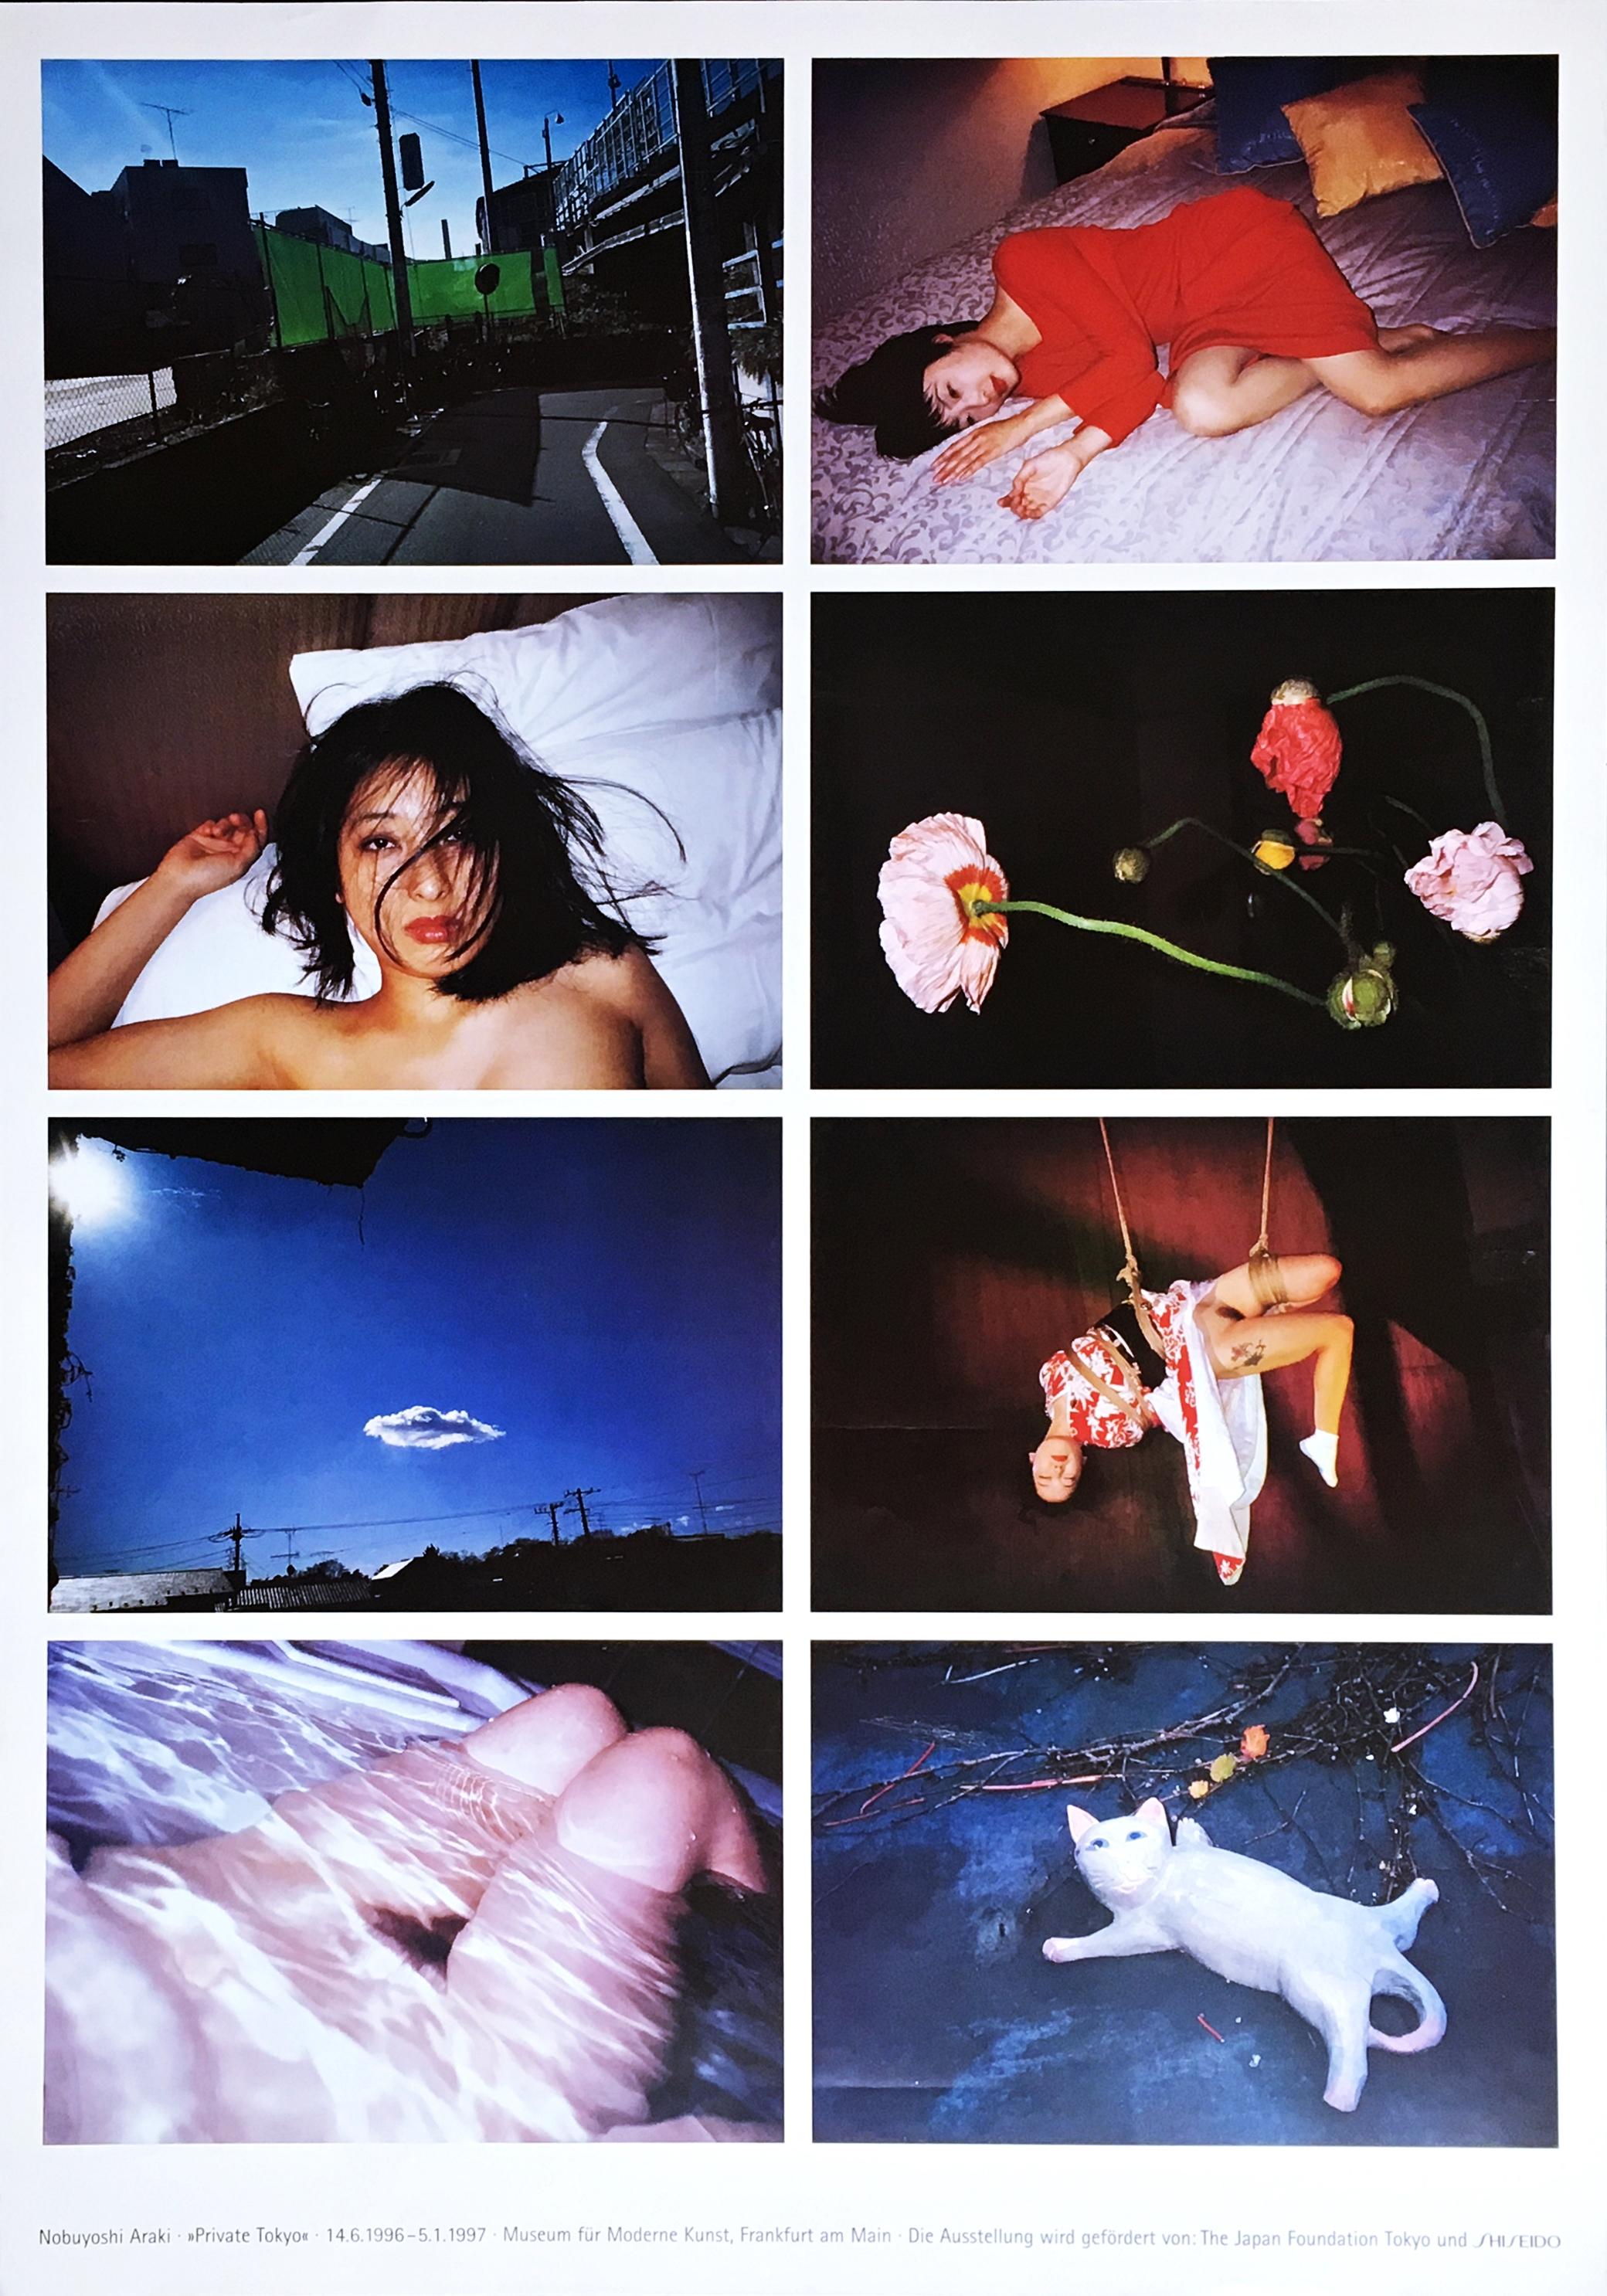 Nobuyoshi Araki
Private Tokyo, 1996
Two Sided Offset Lithograph
Boldly signed and numbered by the artist in black marker on the lower right front
33 × 46 3/5 inches
Unframed
This dramatically large, stunning, vintage, limited edition signed two